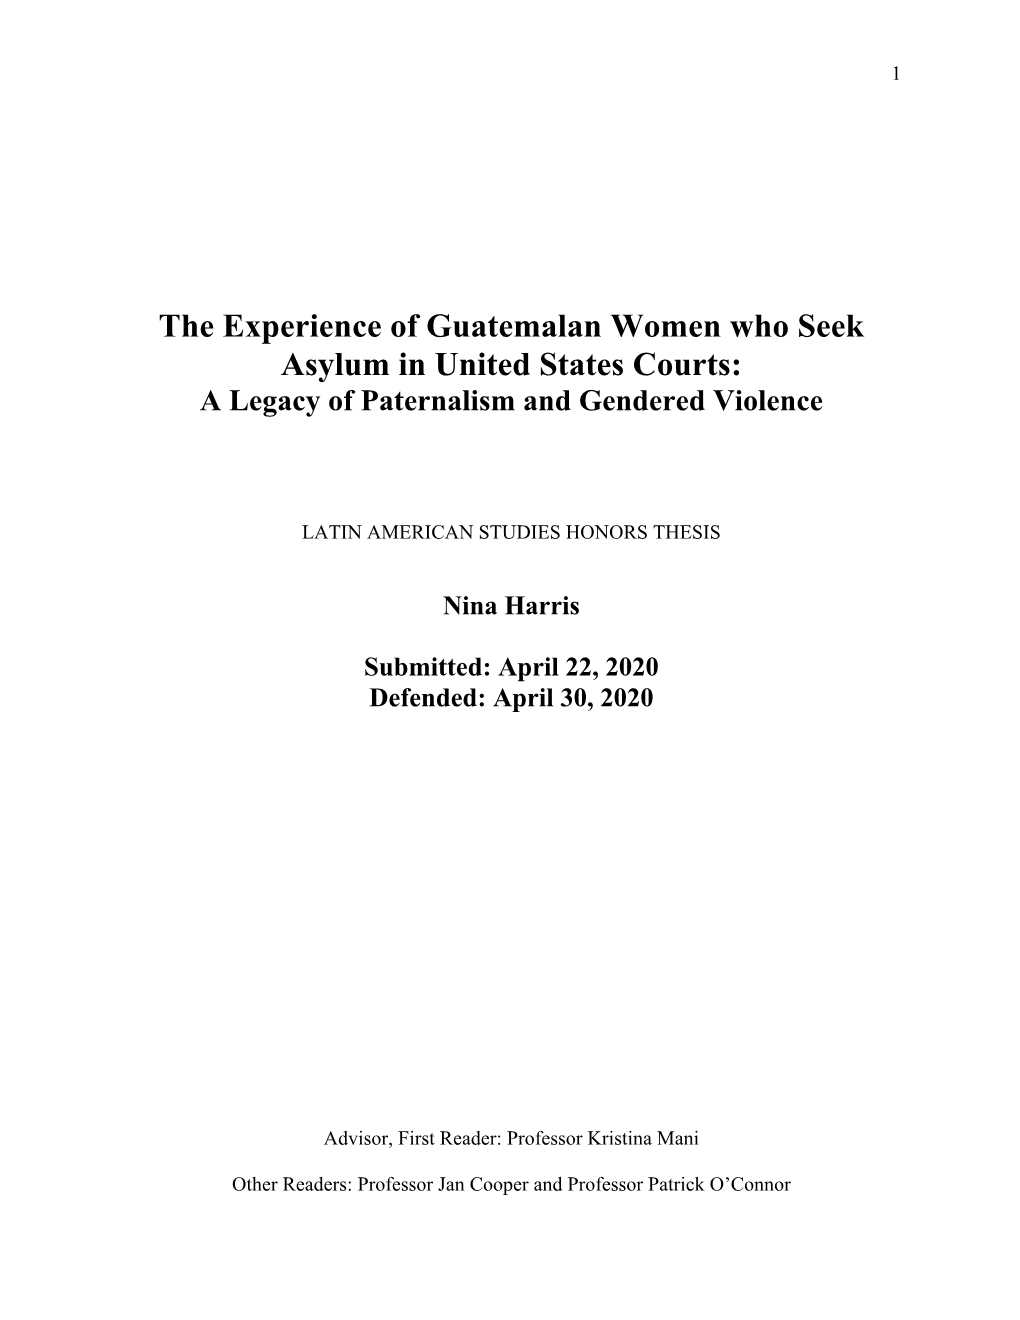 The Experience of Guatemalan Women Who Seek Asylum in United States Courts: a Legacy of Paternalism and Gendered Violence